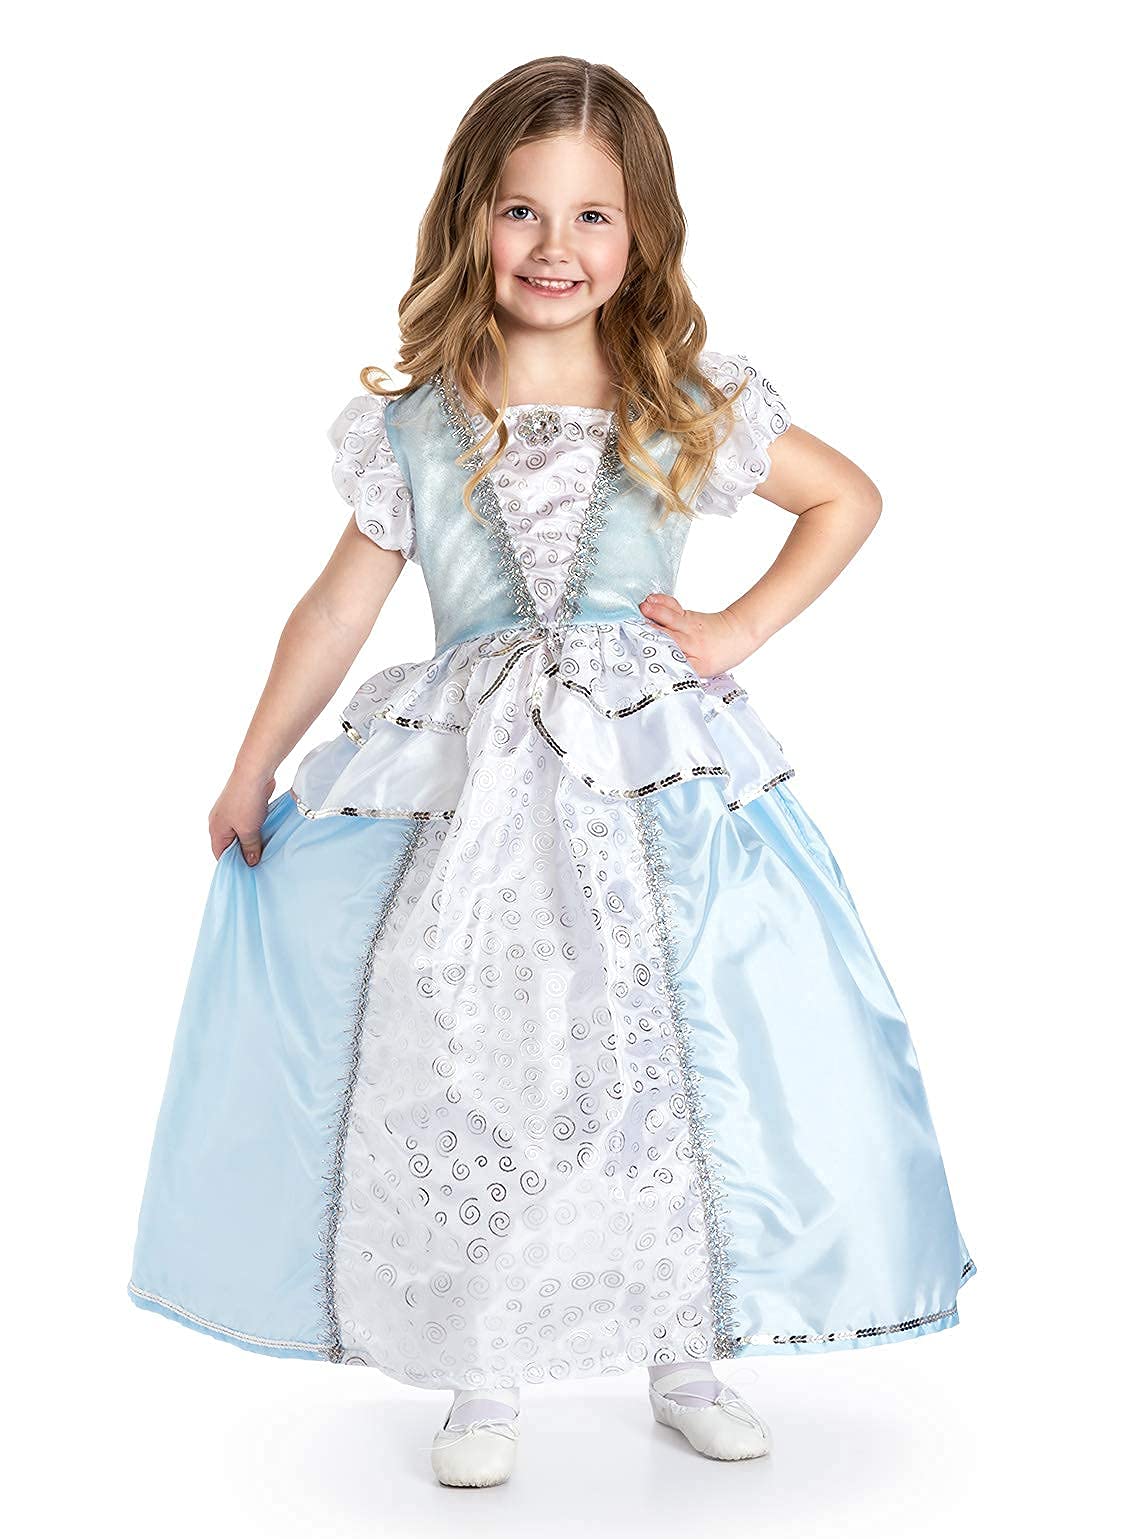 Little Adventures Cinderella Princess Dress Up Costume (Small Age 1-3) with Matching Doll Dress - Machine Washable Child Pretend Play and Party Dress with No Glitter